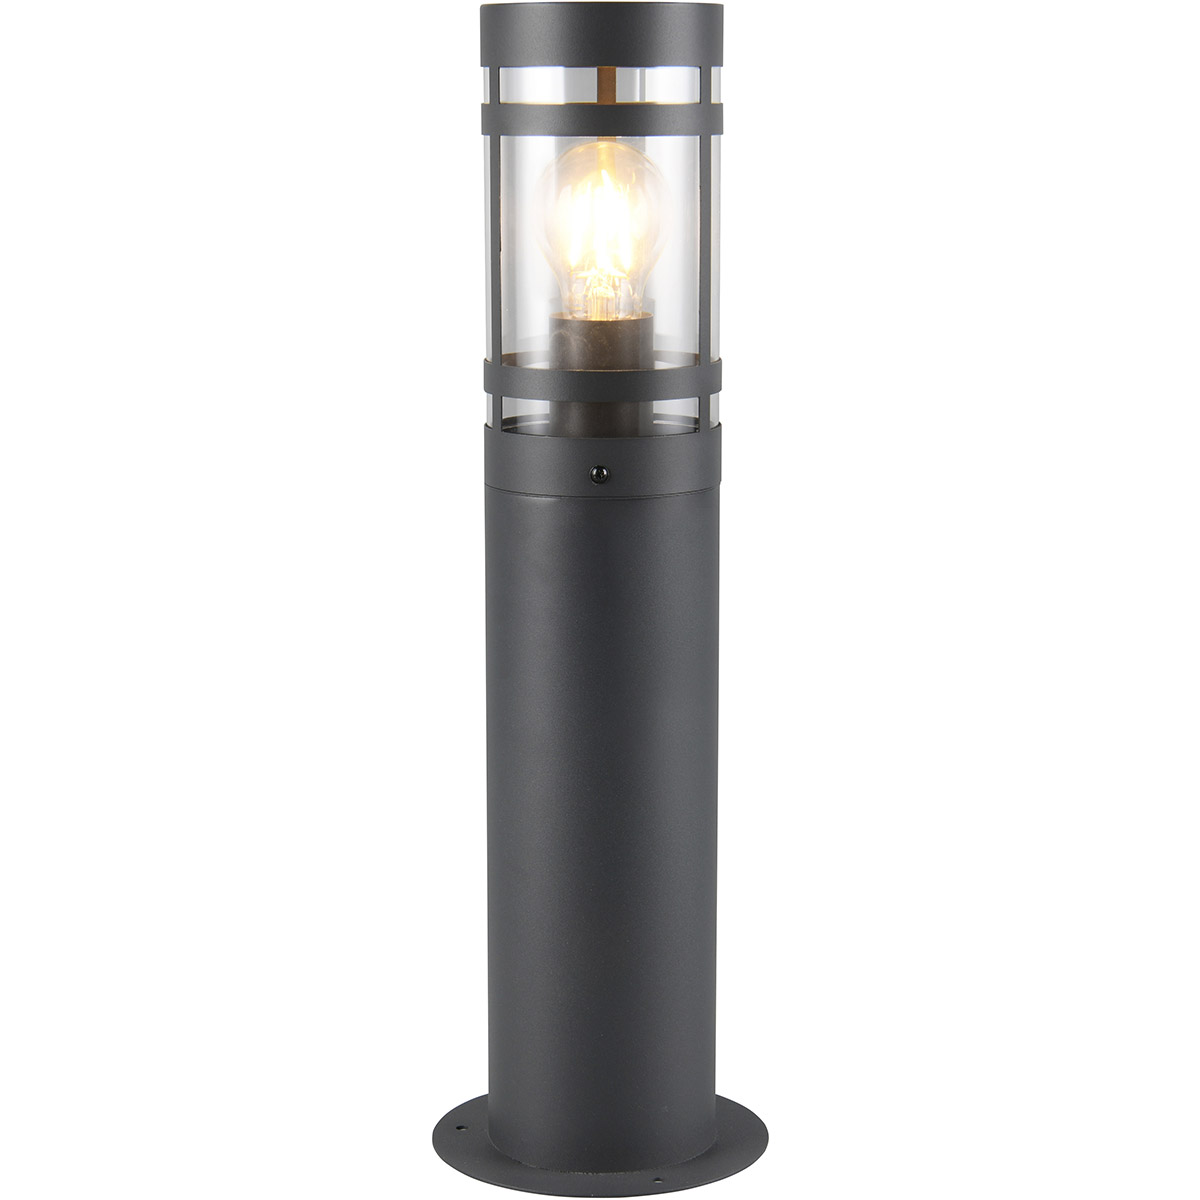 LED Tuinverlichting - Staande Buitenlamp - Trion Paulo - E27 Fitting - Spatwaterdicht IP44 - Rond - Antraciet - Metaal